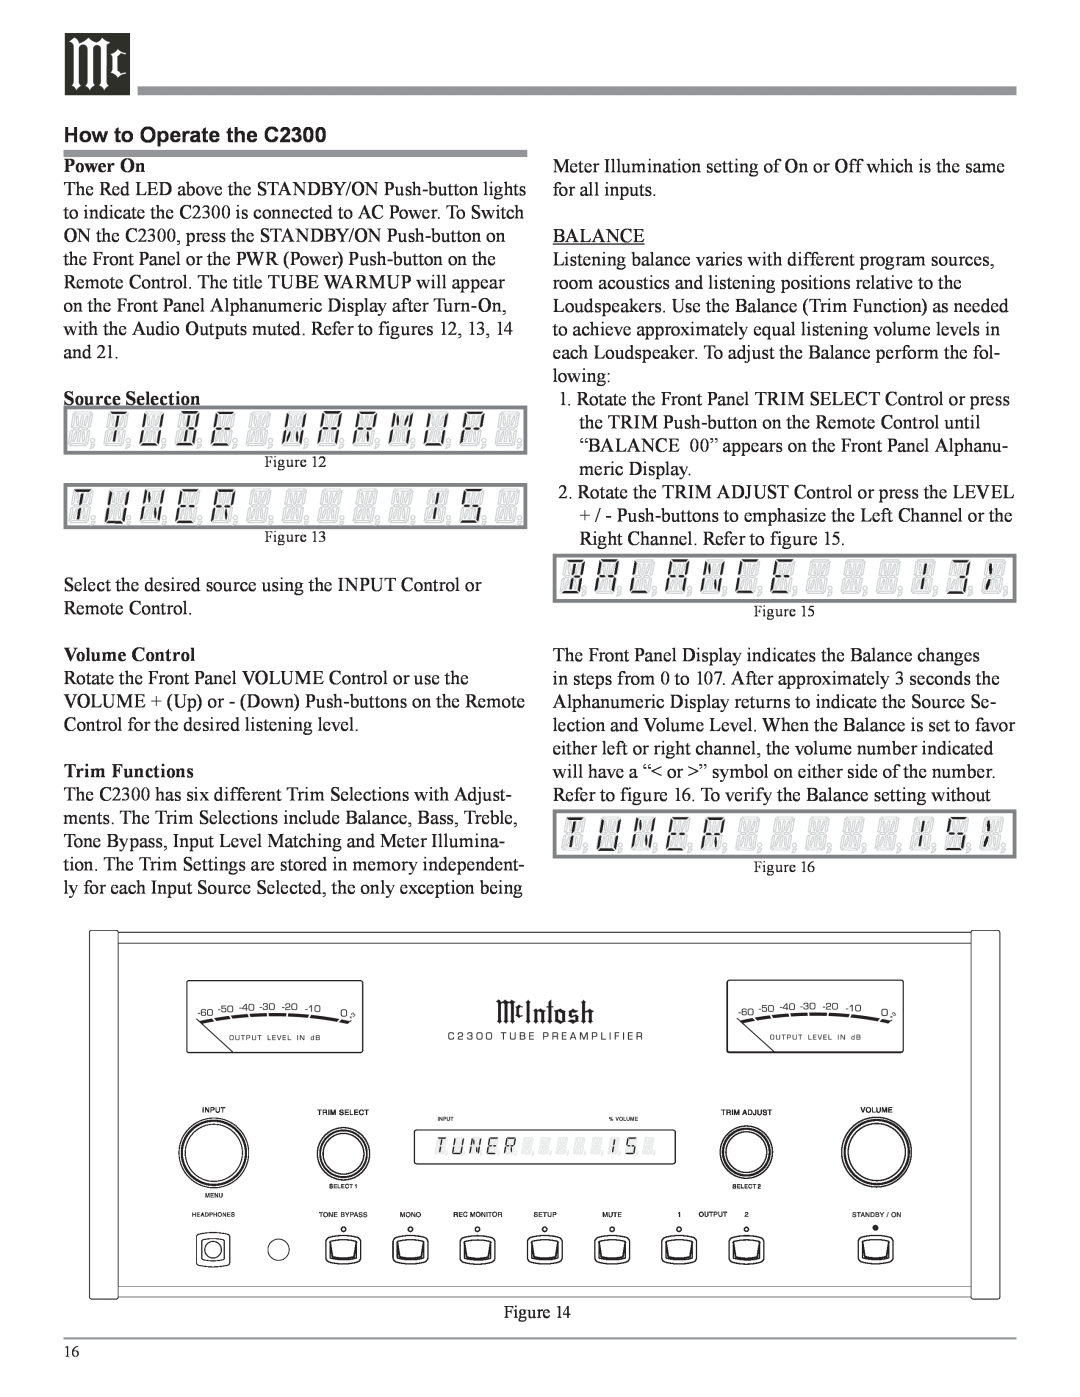 McIntosh owner manual How to Operate the C2300, Power On, SourceSelection, Volume Control, Trim Functions 